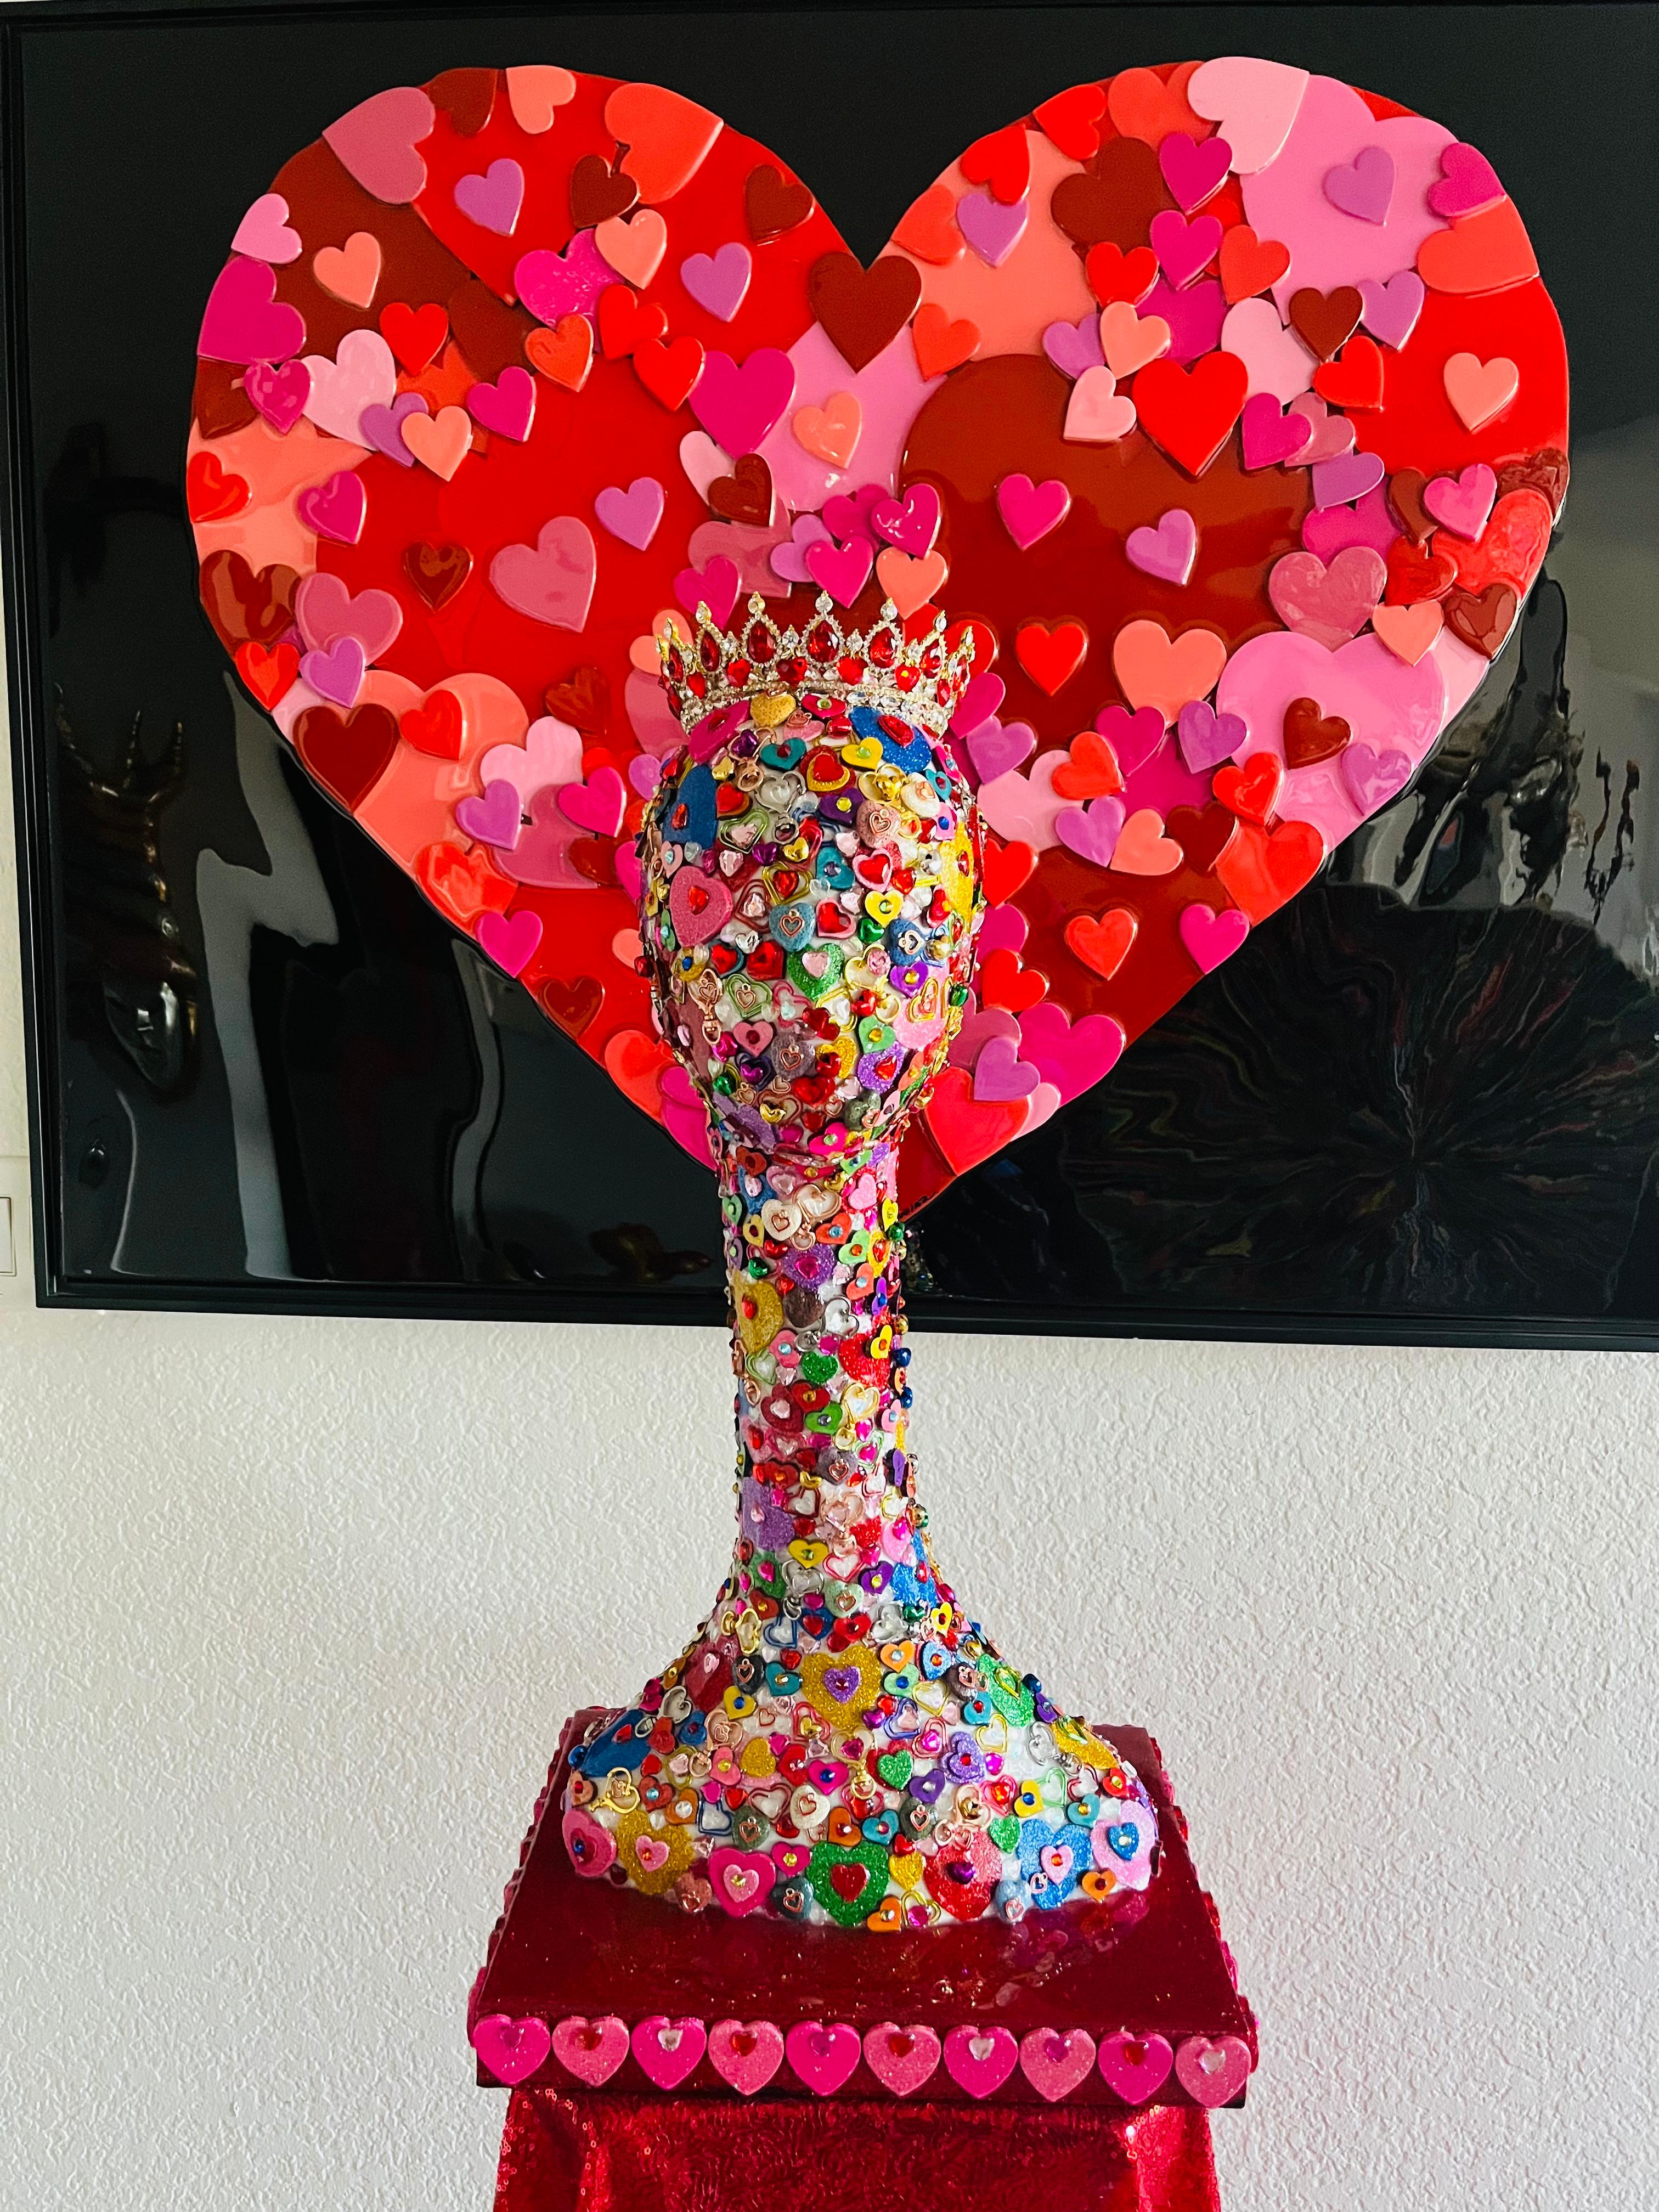 QUEEN OF HEARTS (Original and One of A Kind Mixed Media Sculpture)